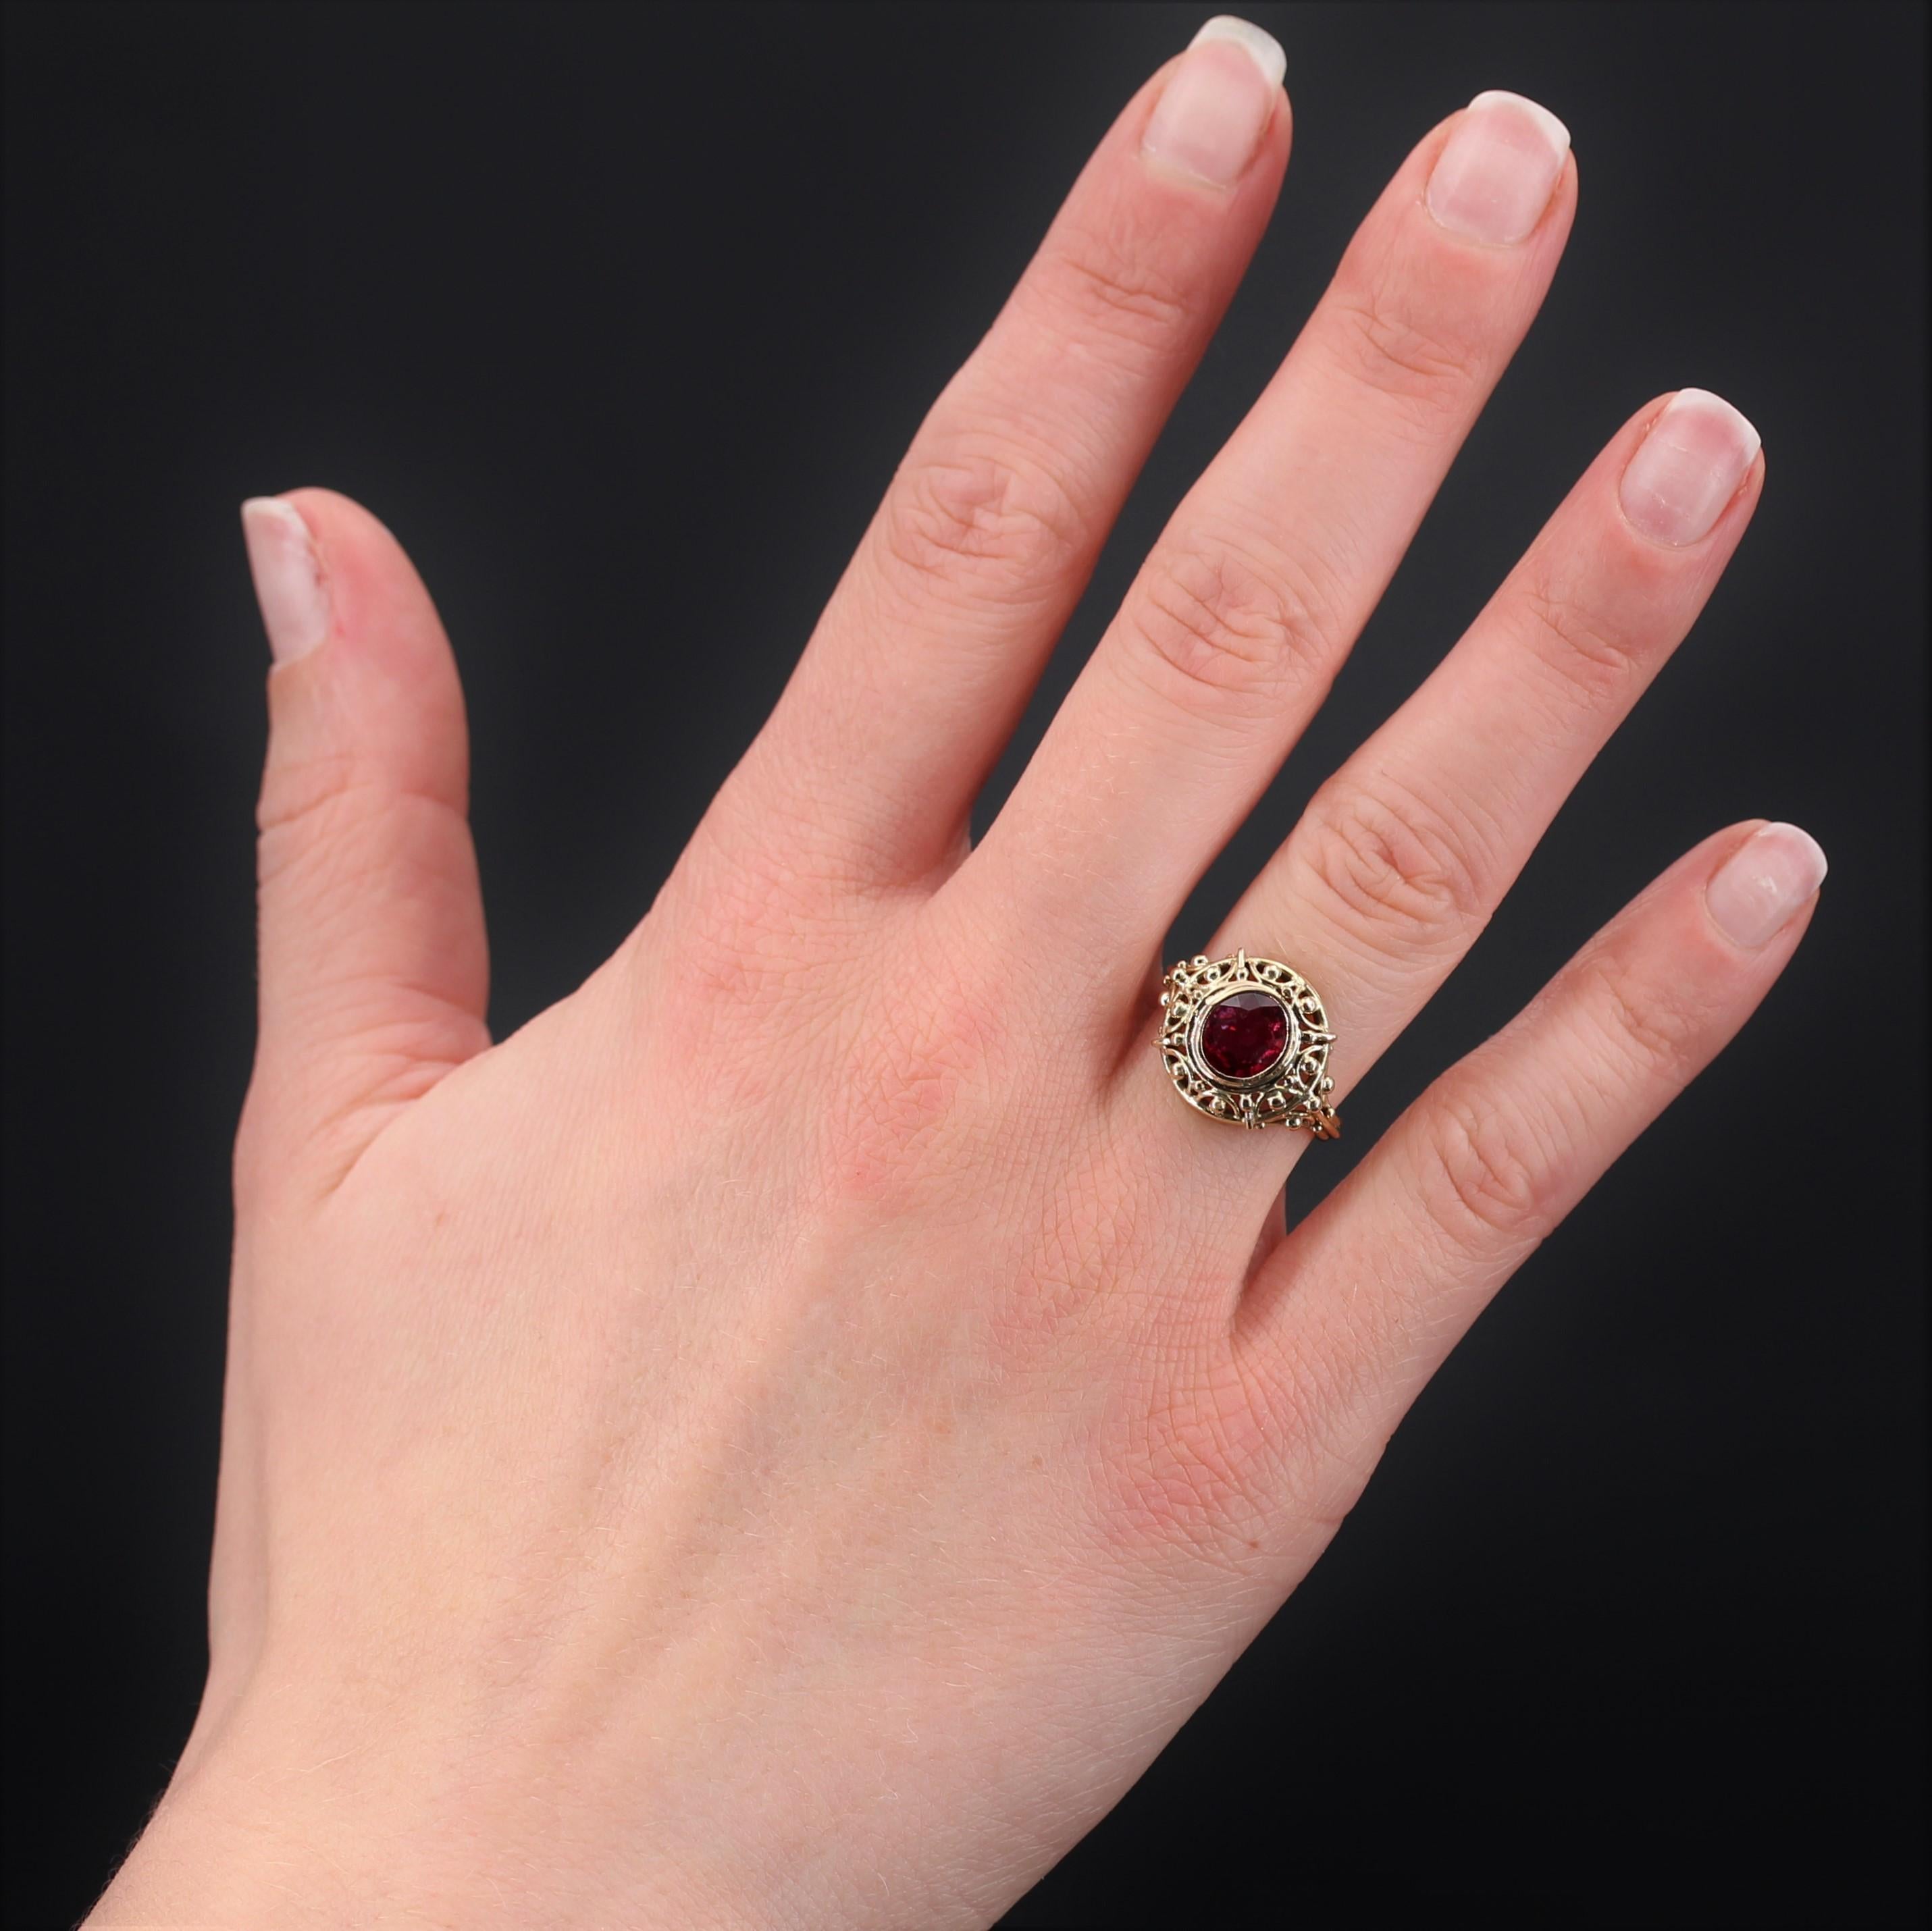 Ring in 18 karat yellow gold, eagle head hallmark.
Splendid yellow gold setting, it is openworked of gold arabesques, strewn with small gold pearls and decorated in its center in closed setting of a cushion- cut ruby of the most beautiful